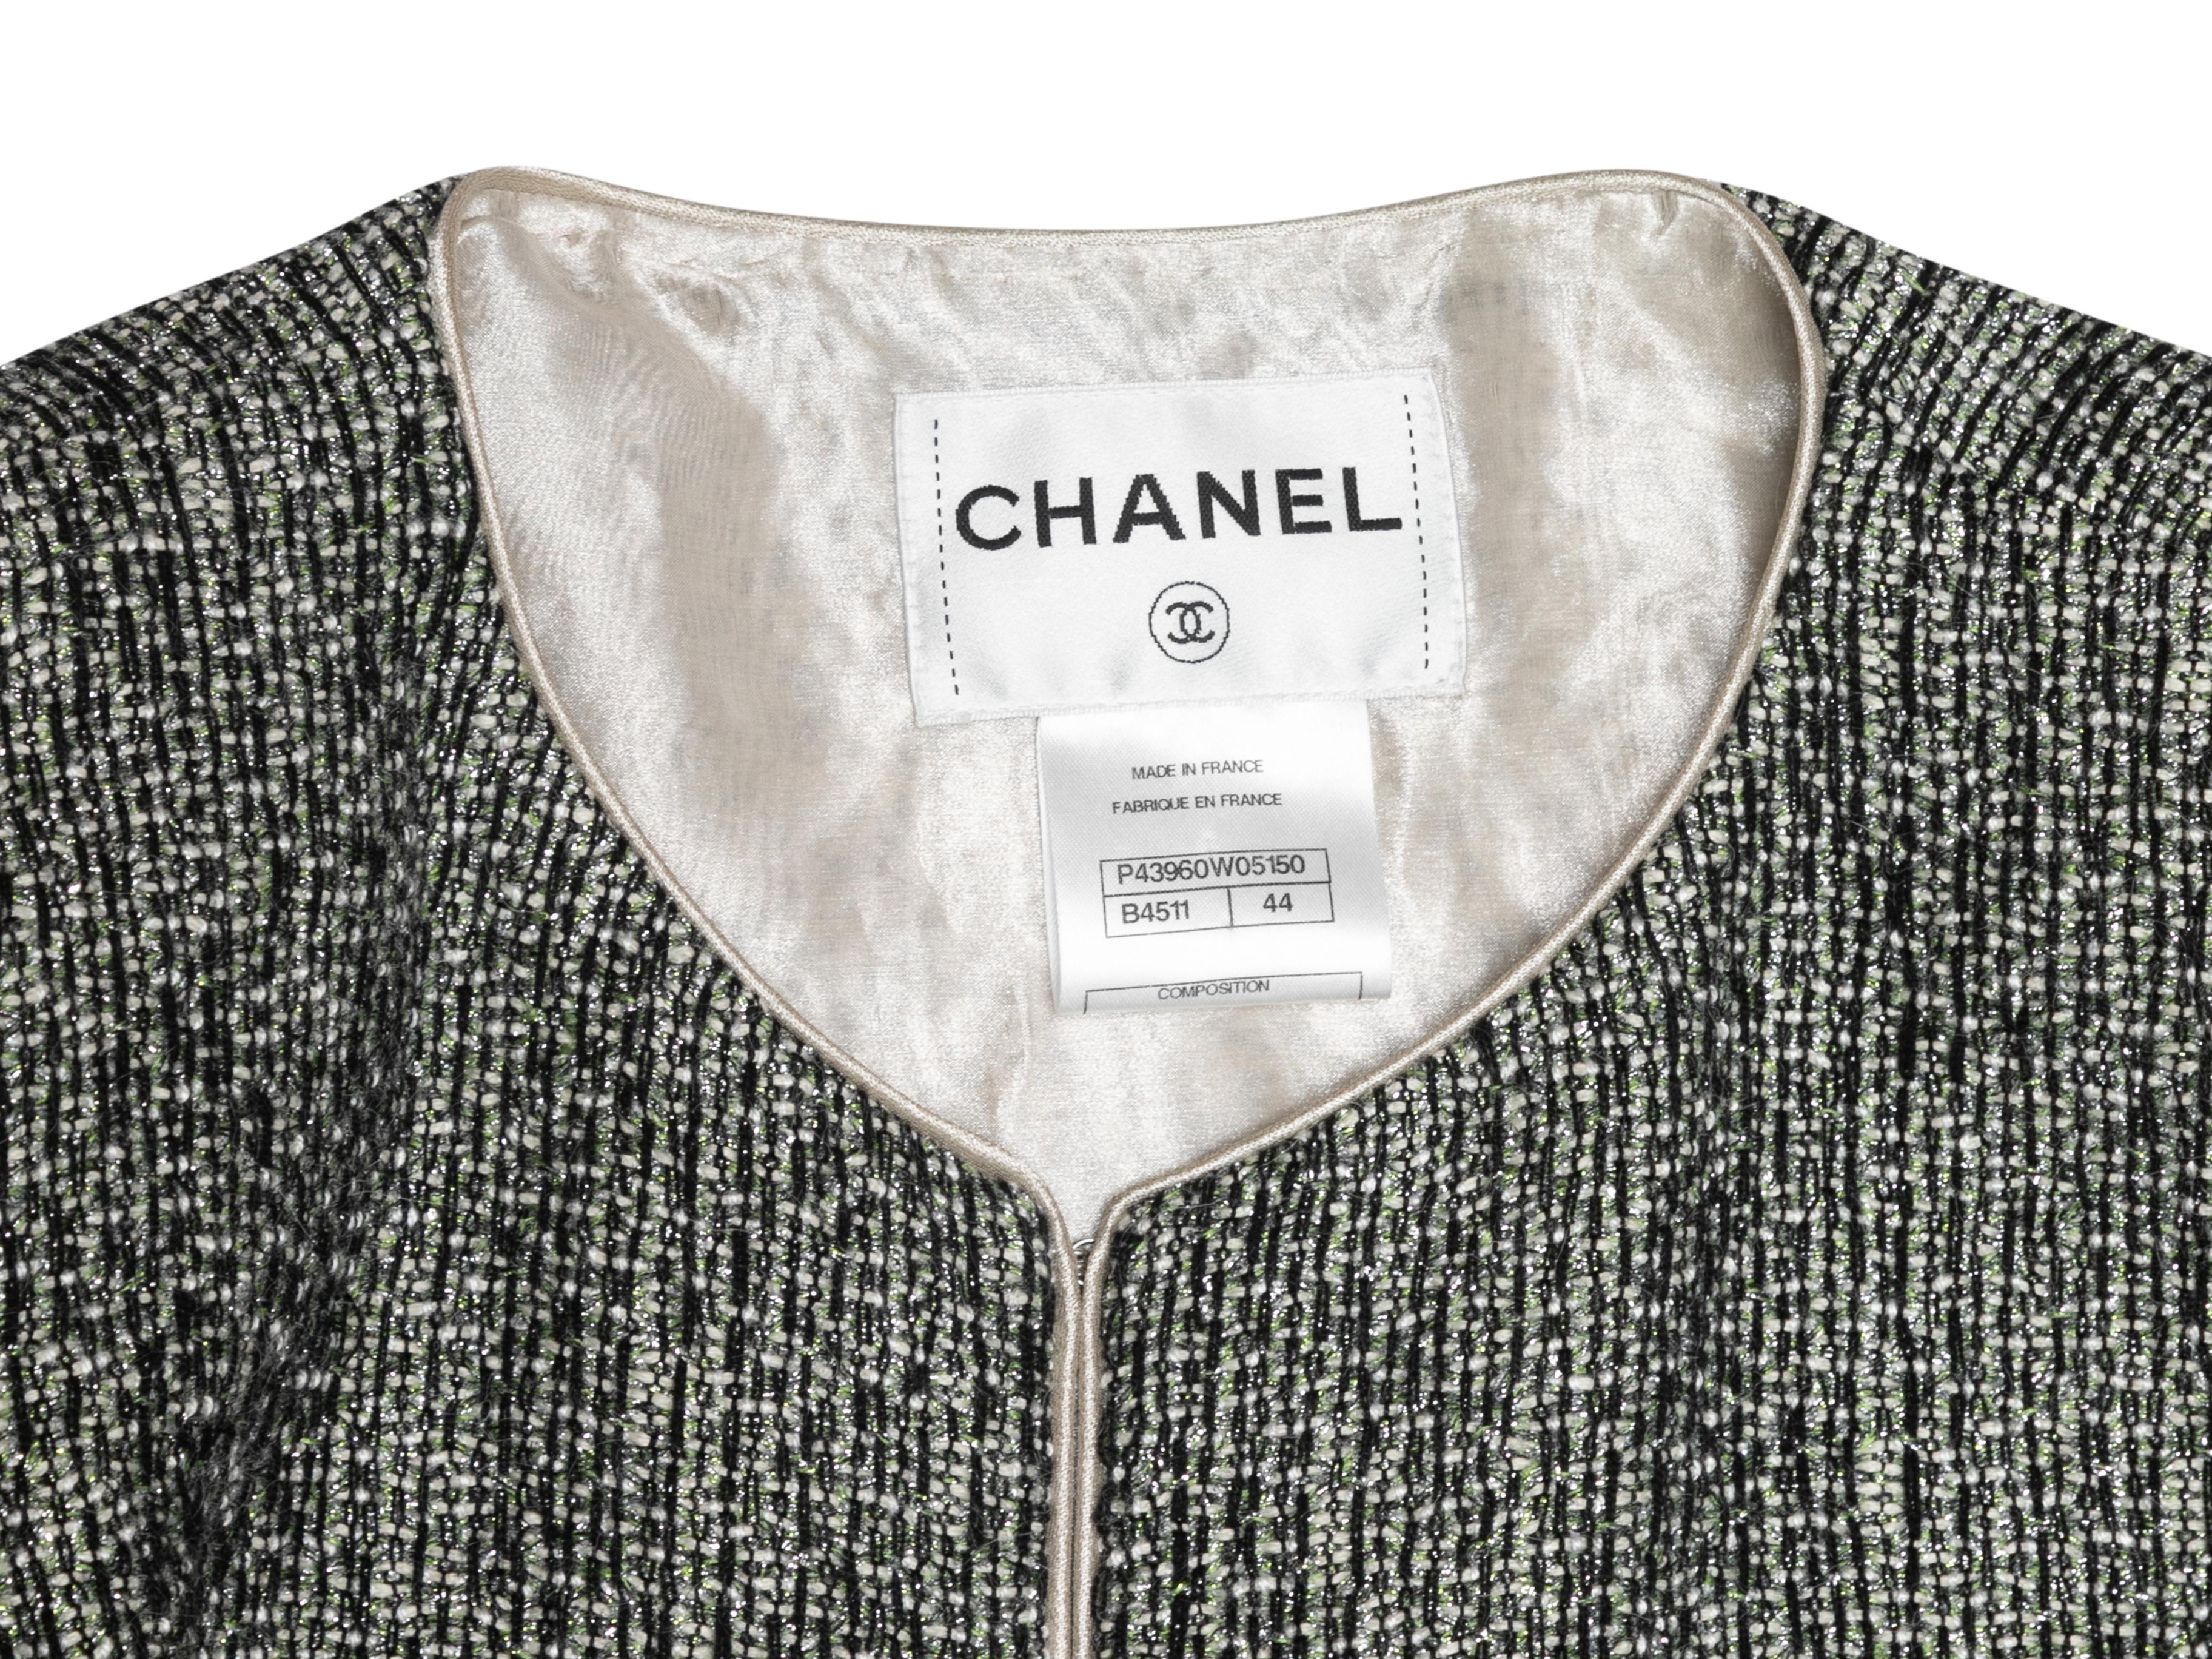 Black, green, and white alpaca-blend tweed jacket by Chanel. Crew neck. Hook-and-eye front closure. 40